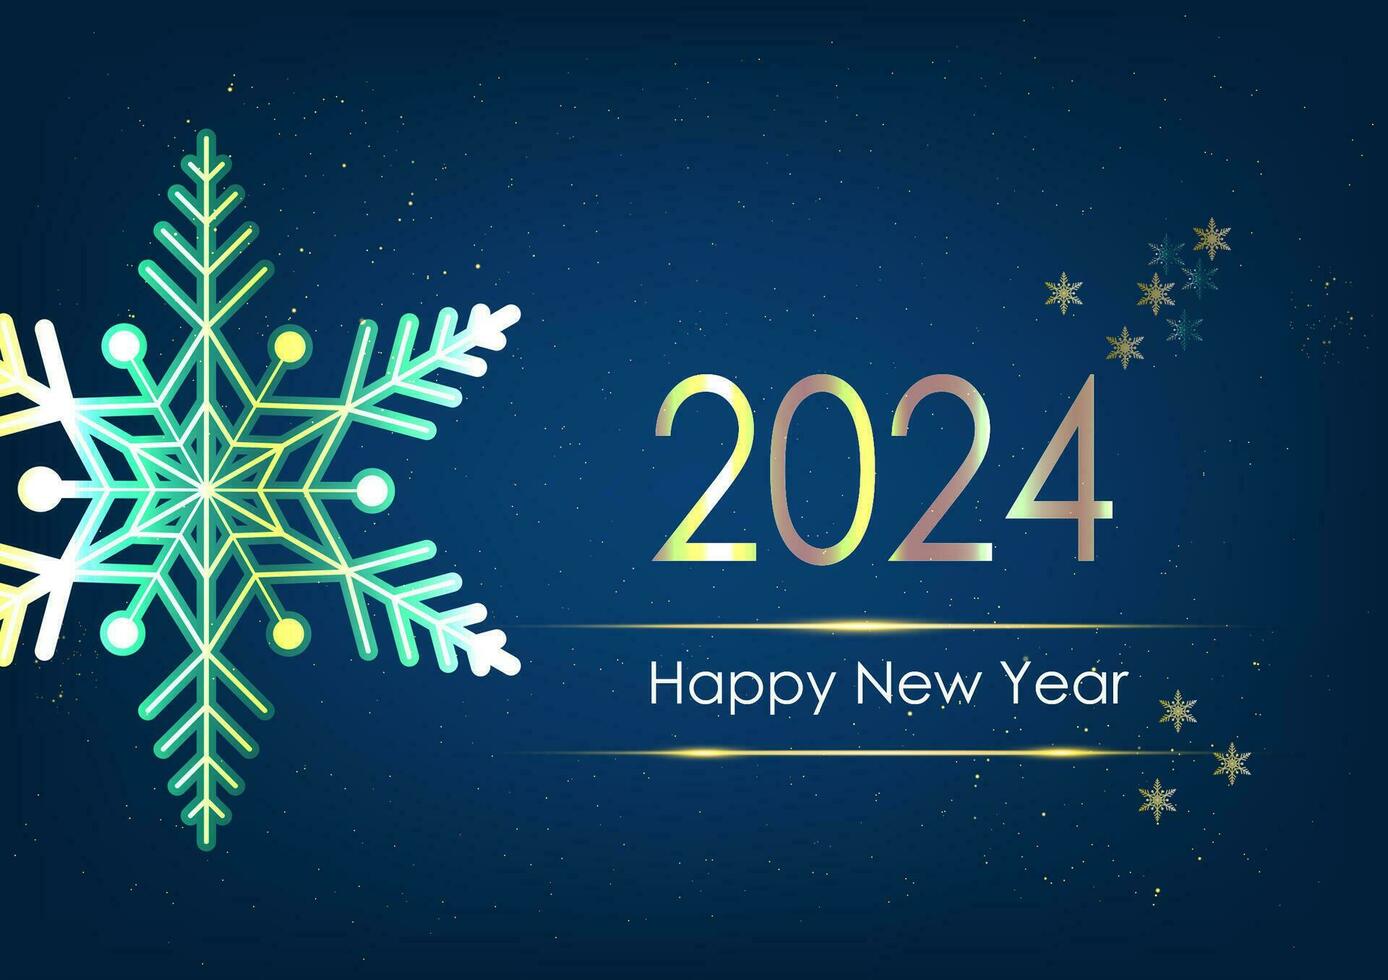 Happy new year 2024 background with snowflakes on dark blue background. Vector illustration for Christmas and New year holiday greeting card.